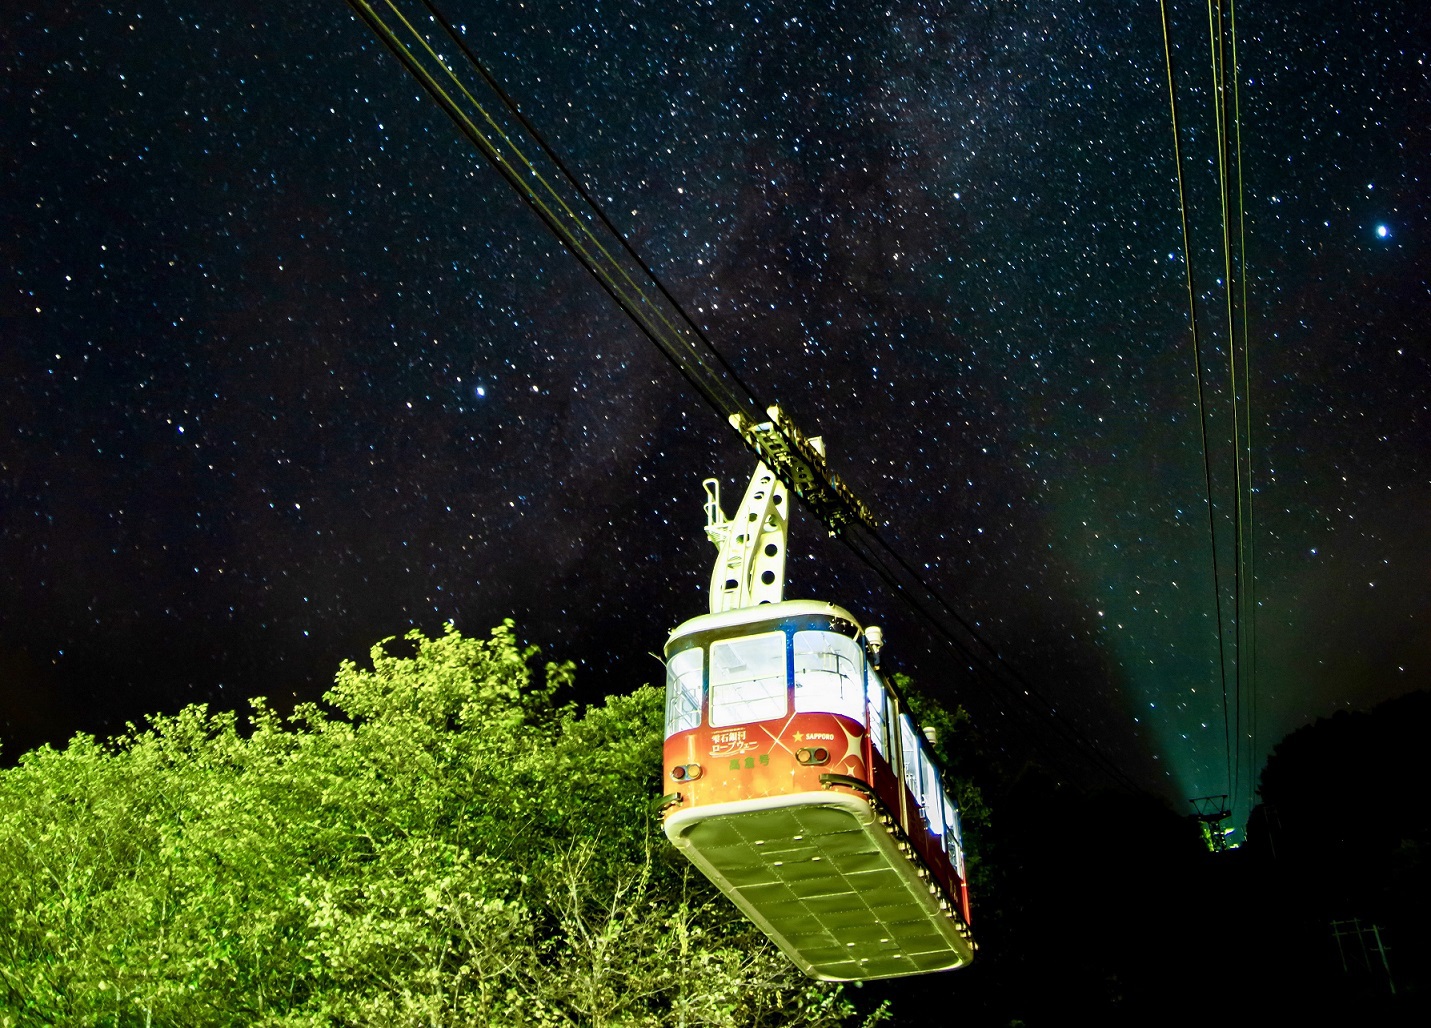 Gaze at stunning starry skies from 730 m above ground from the Shizukuishi Galaxy Ropeway- now open